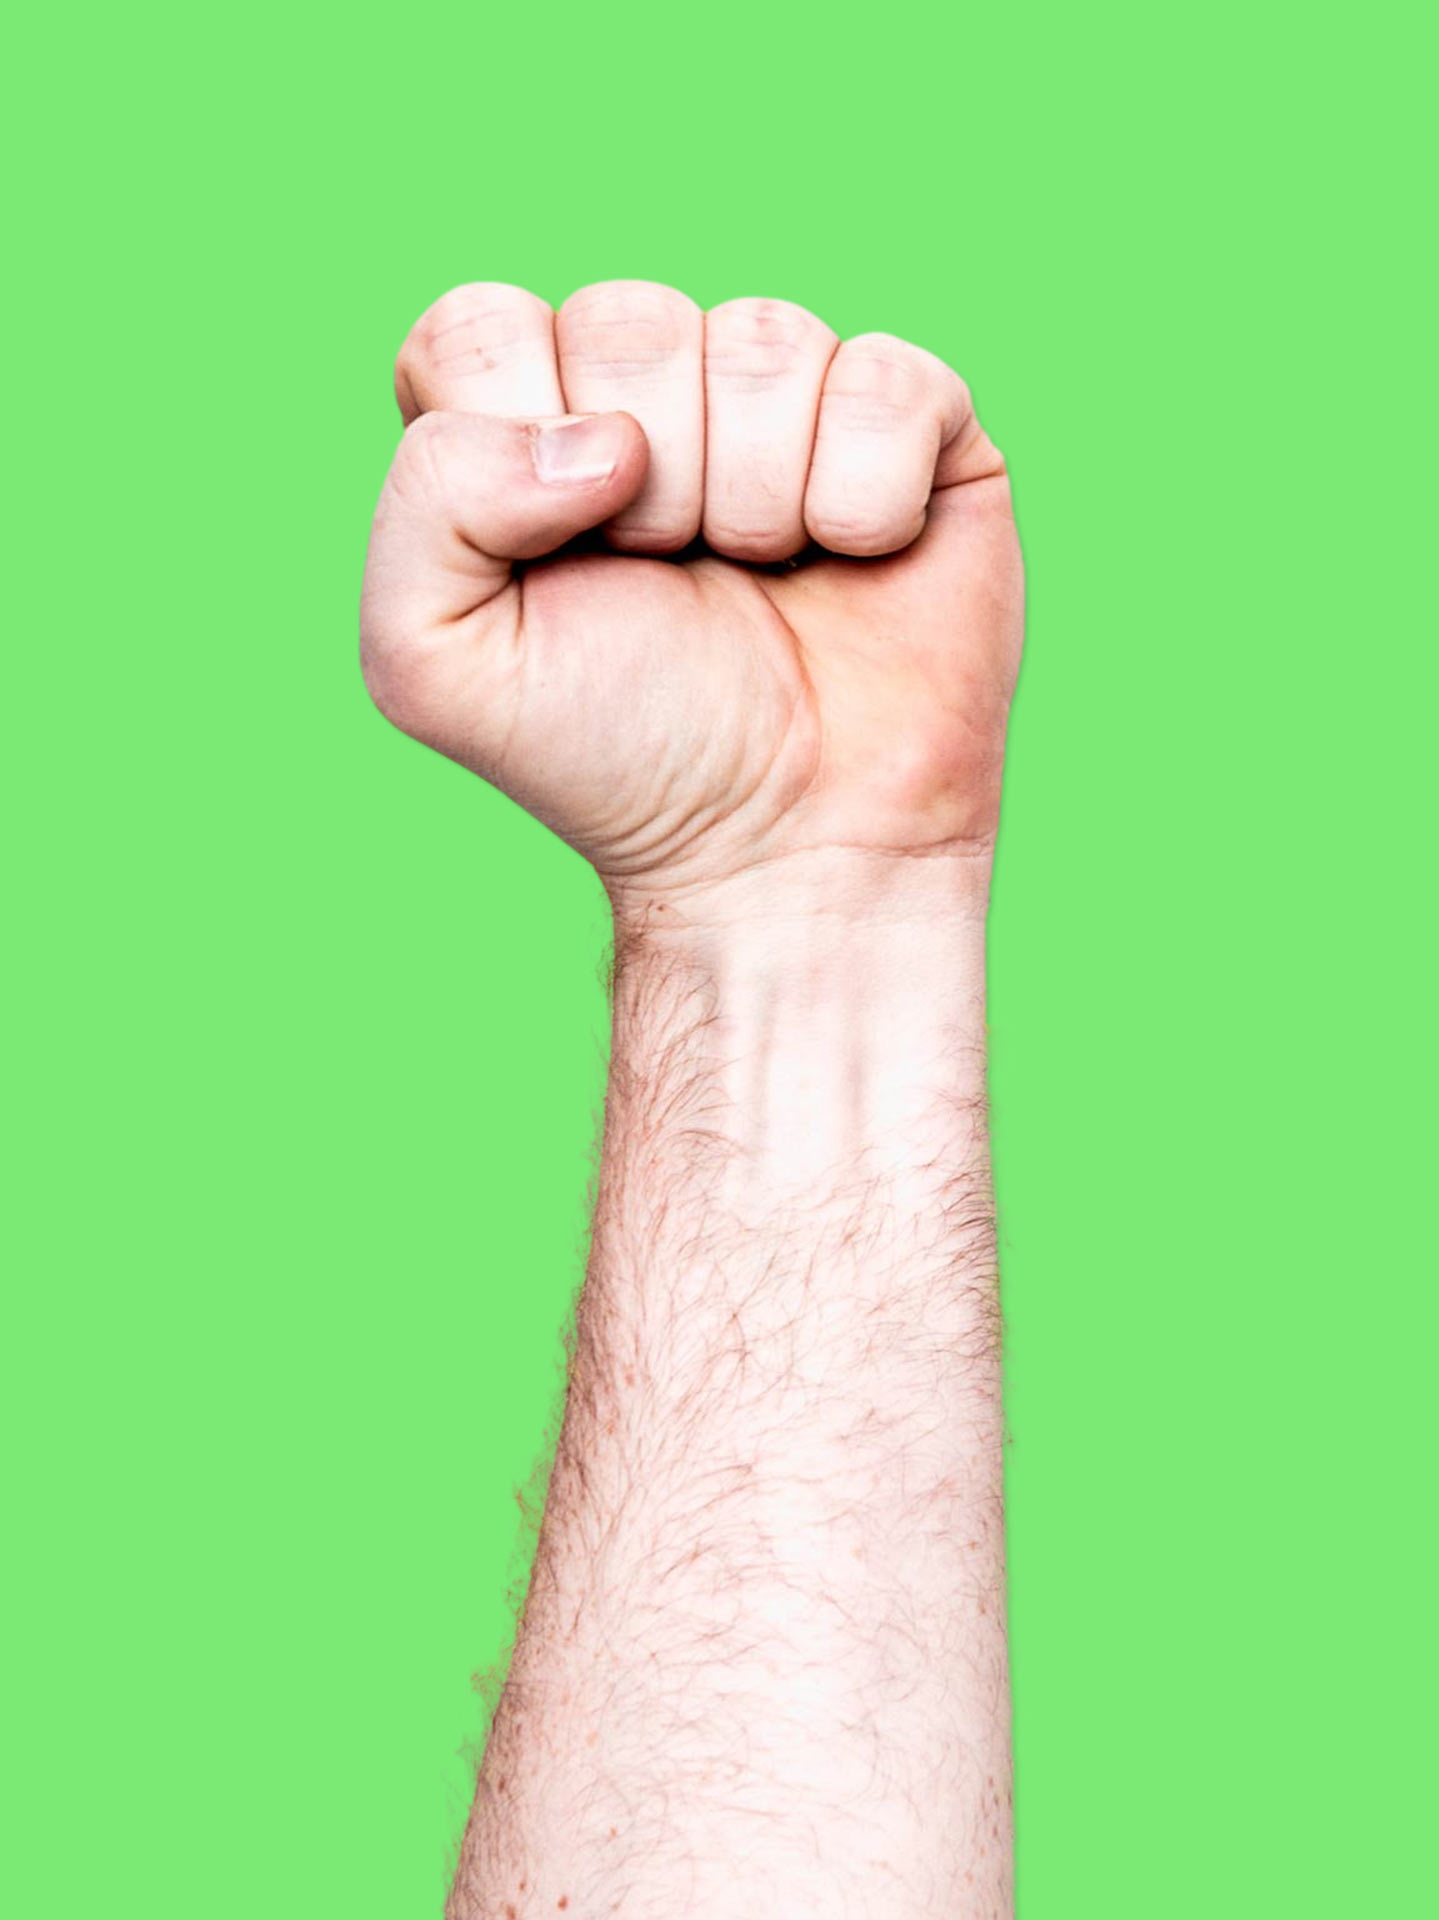 A fist on the CoreMorph green background